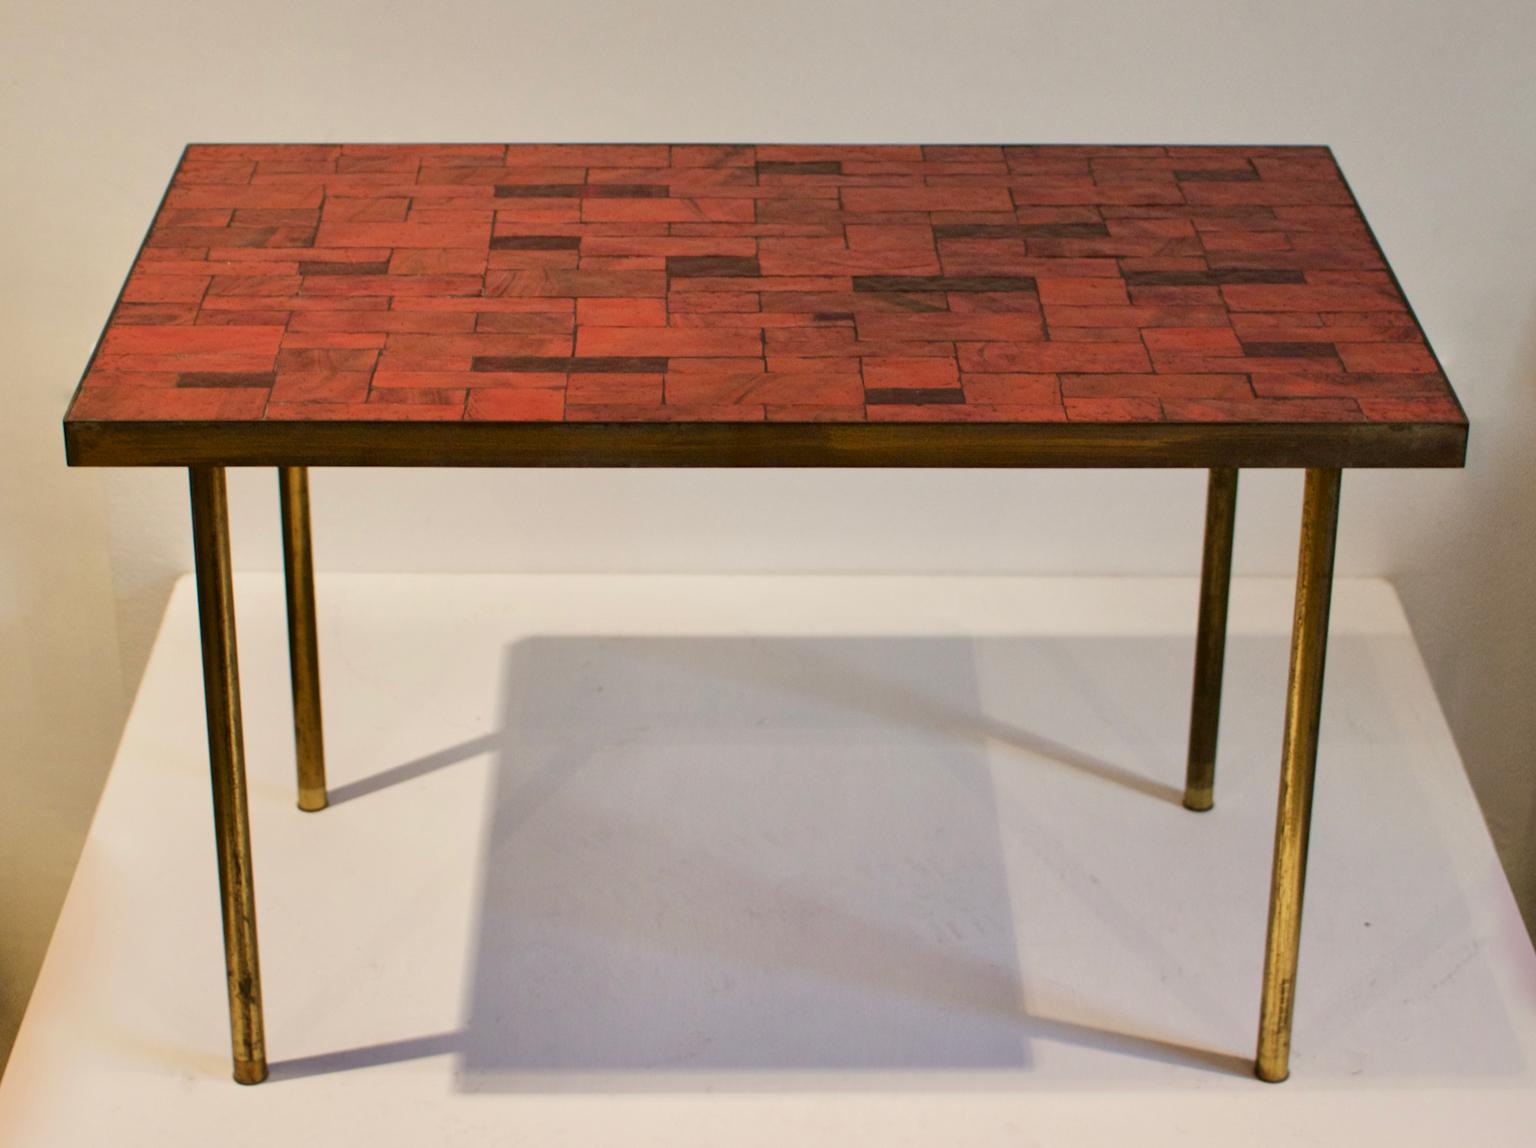 Mid-Century Modern Midcentury Mosaic Side Table in Warm Red Tones by Müller, Germany, ‘Signed’ For Sale